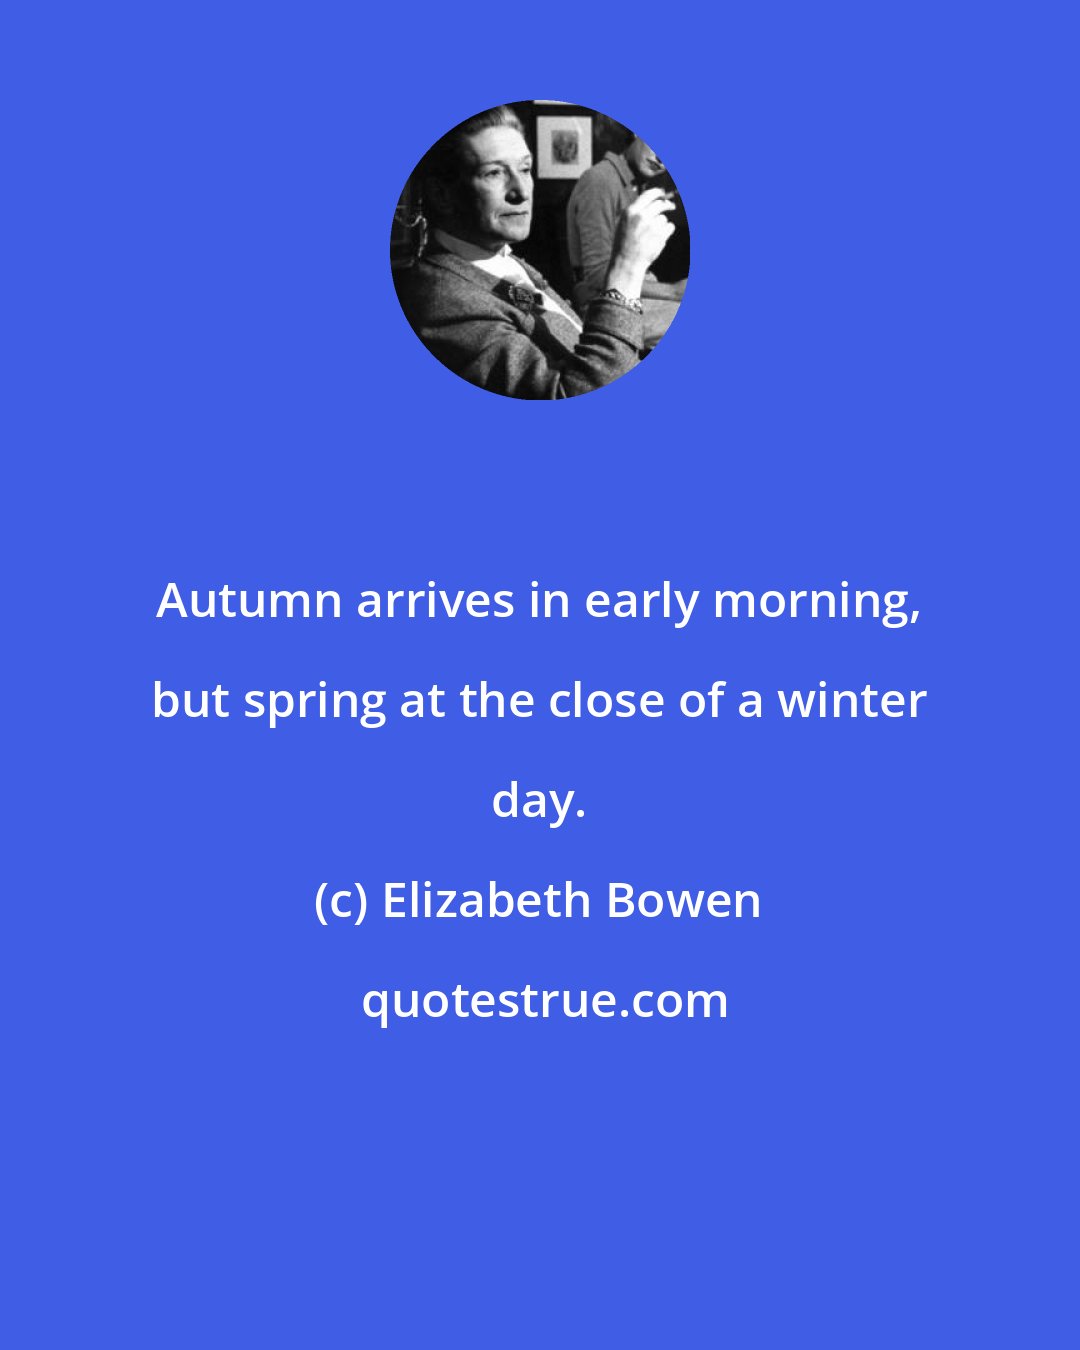 Elizabeth Bowen: Autumn arrives in early morning, but spring at the close of a winter day.